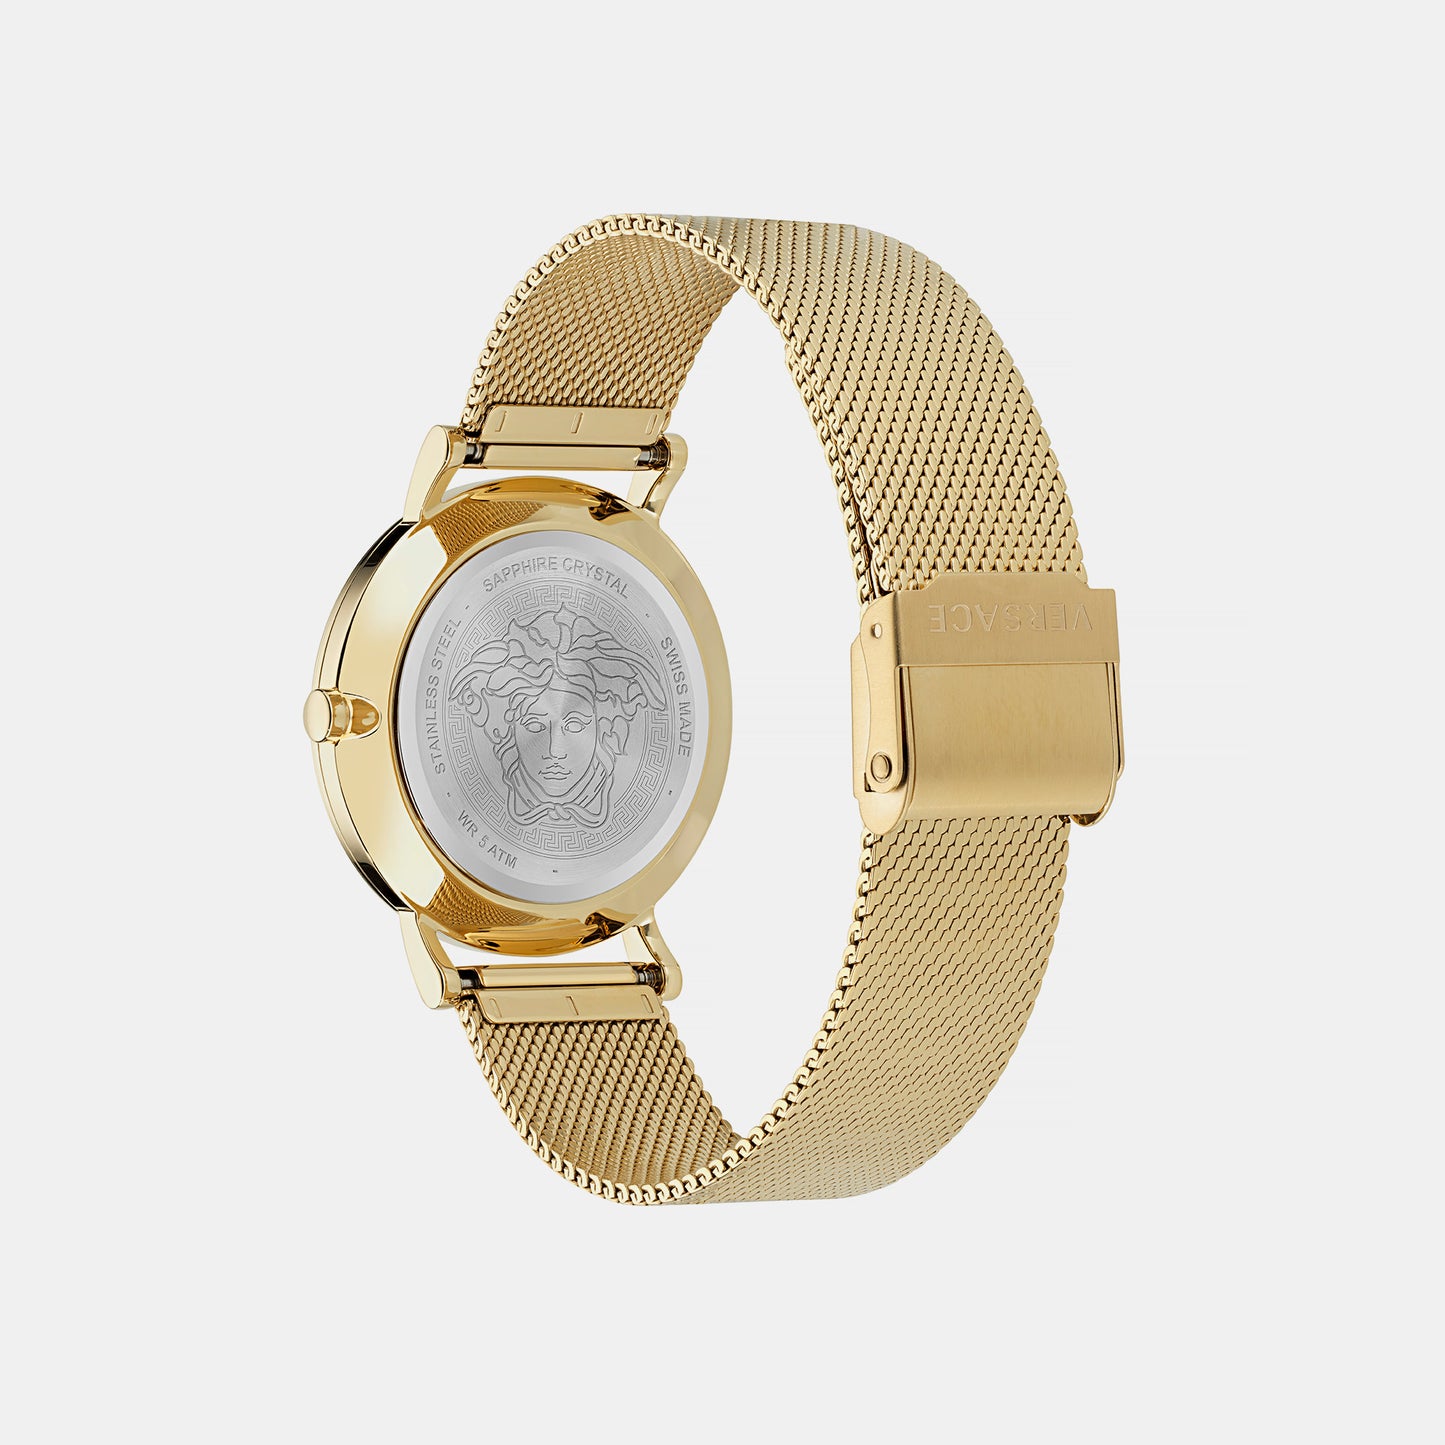 Female Gold-Tone Analog Stainless Steel Watch VE3M01223